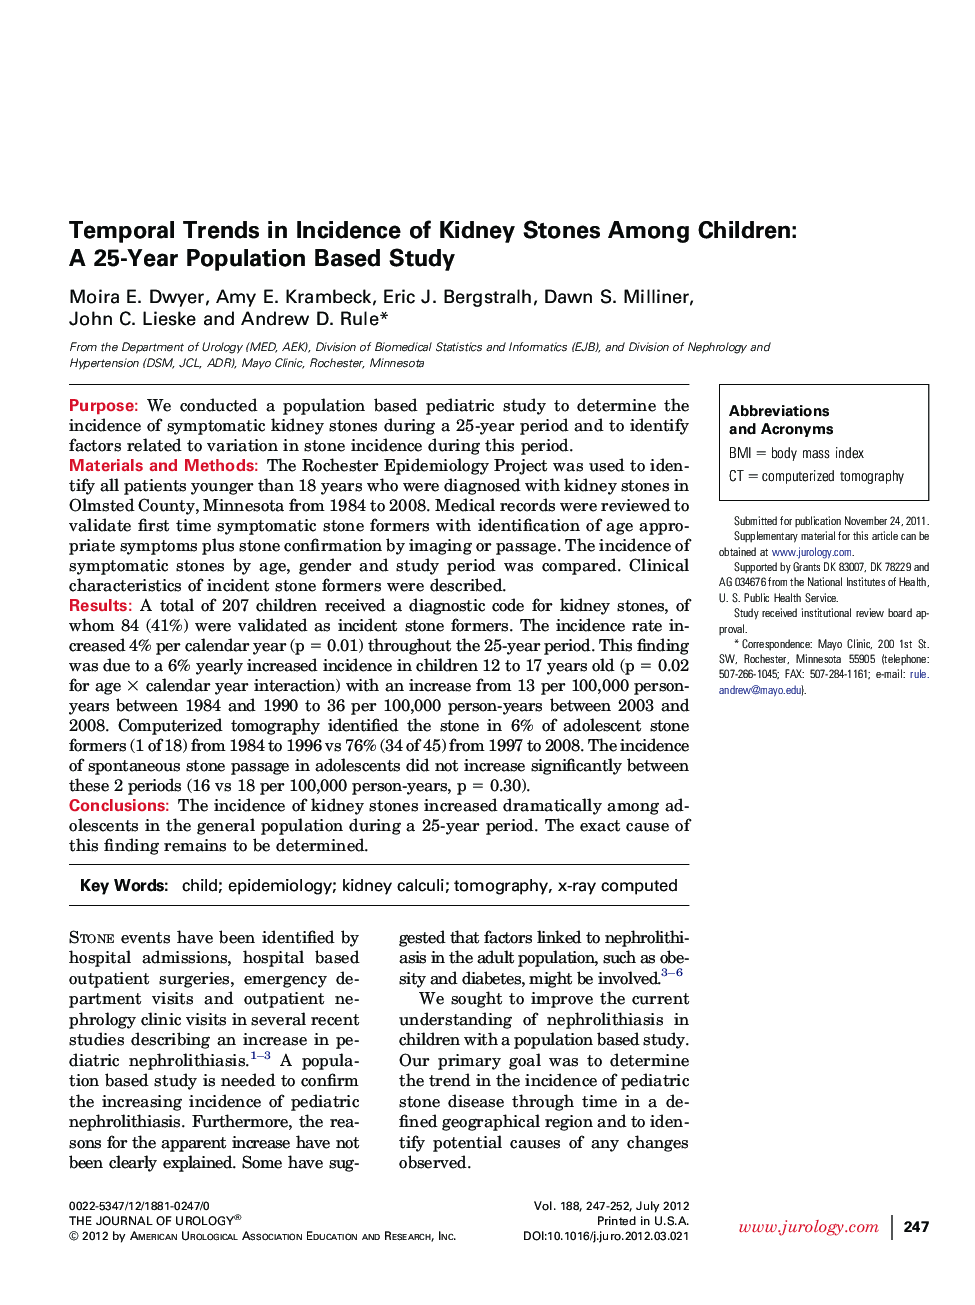 Temporal Trends in Incidence of Kidney Stones Among Children: A 25-Year Population Based Study 